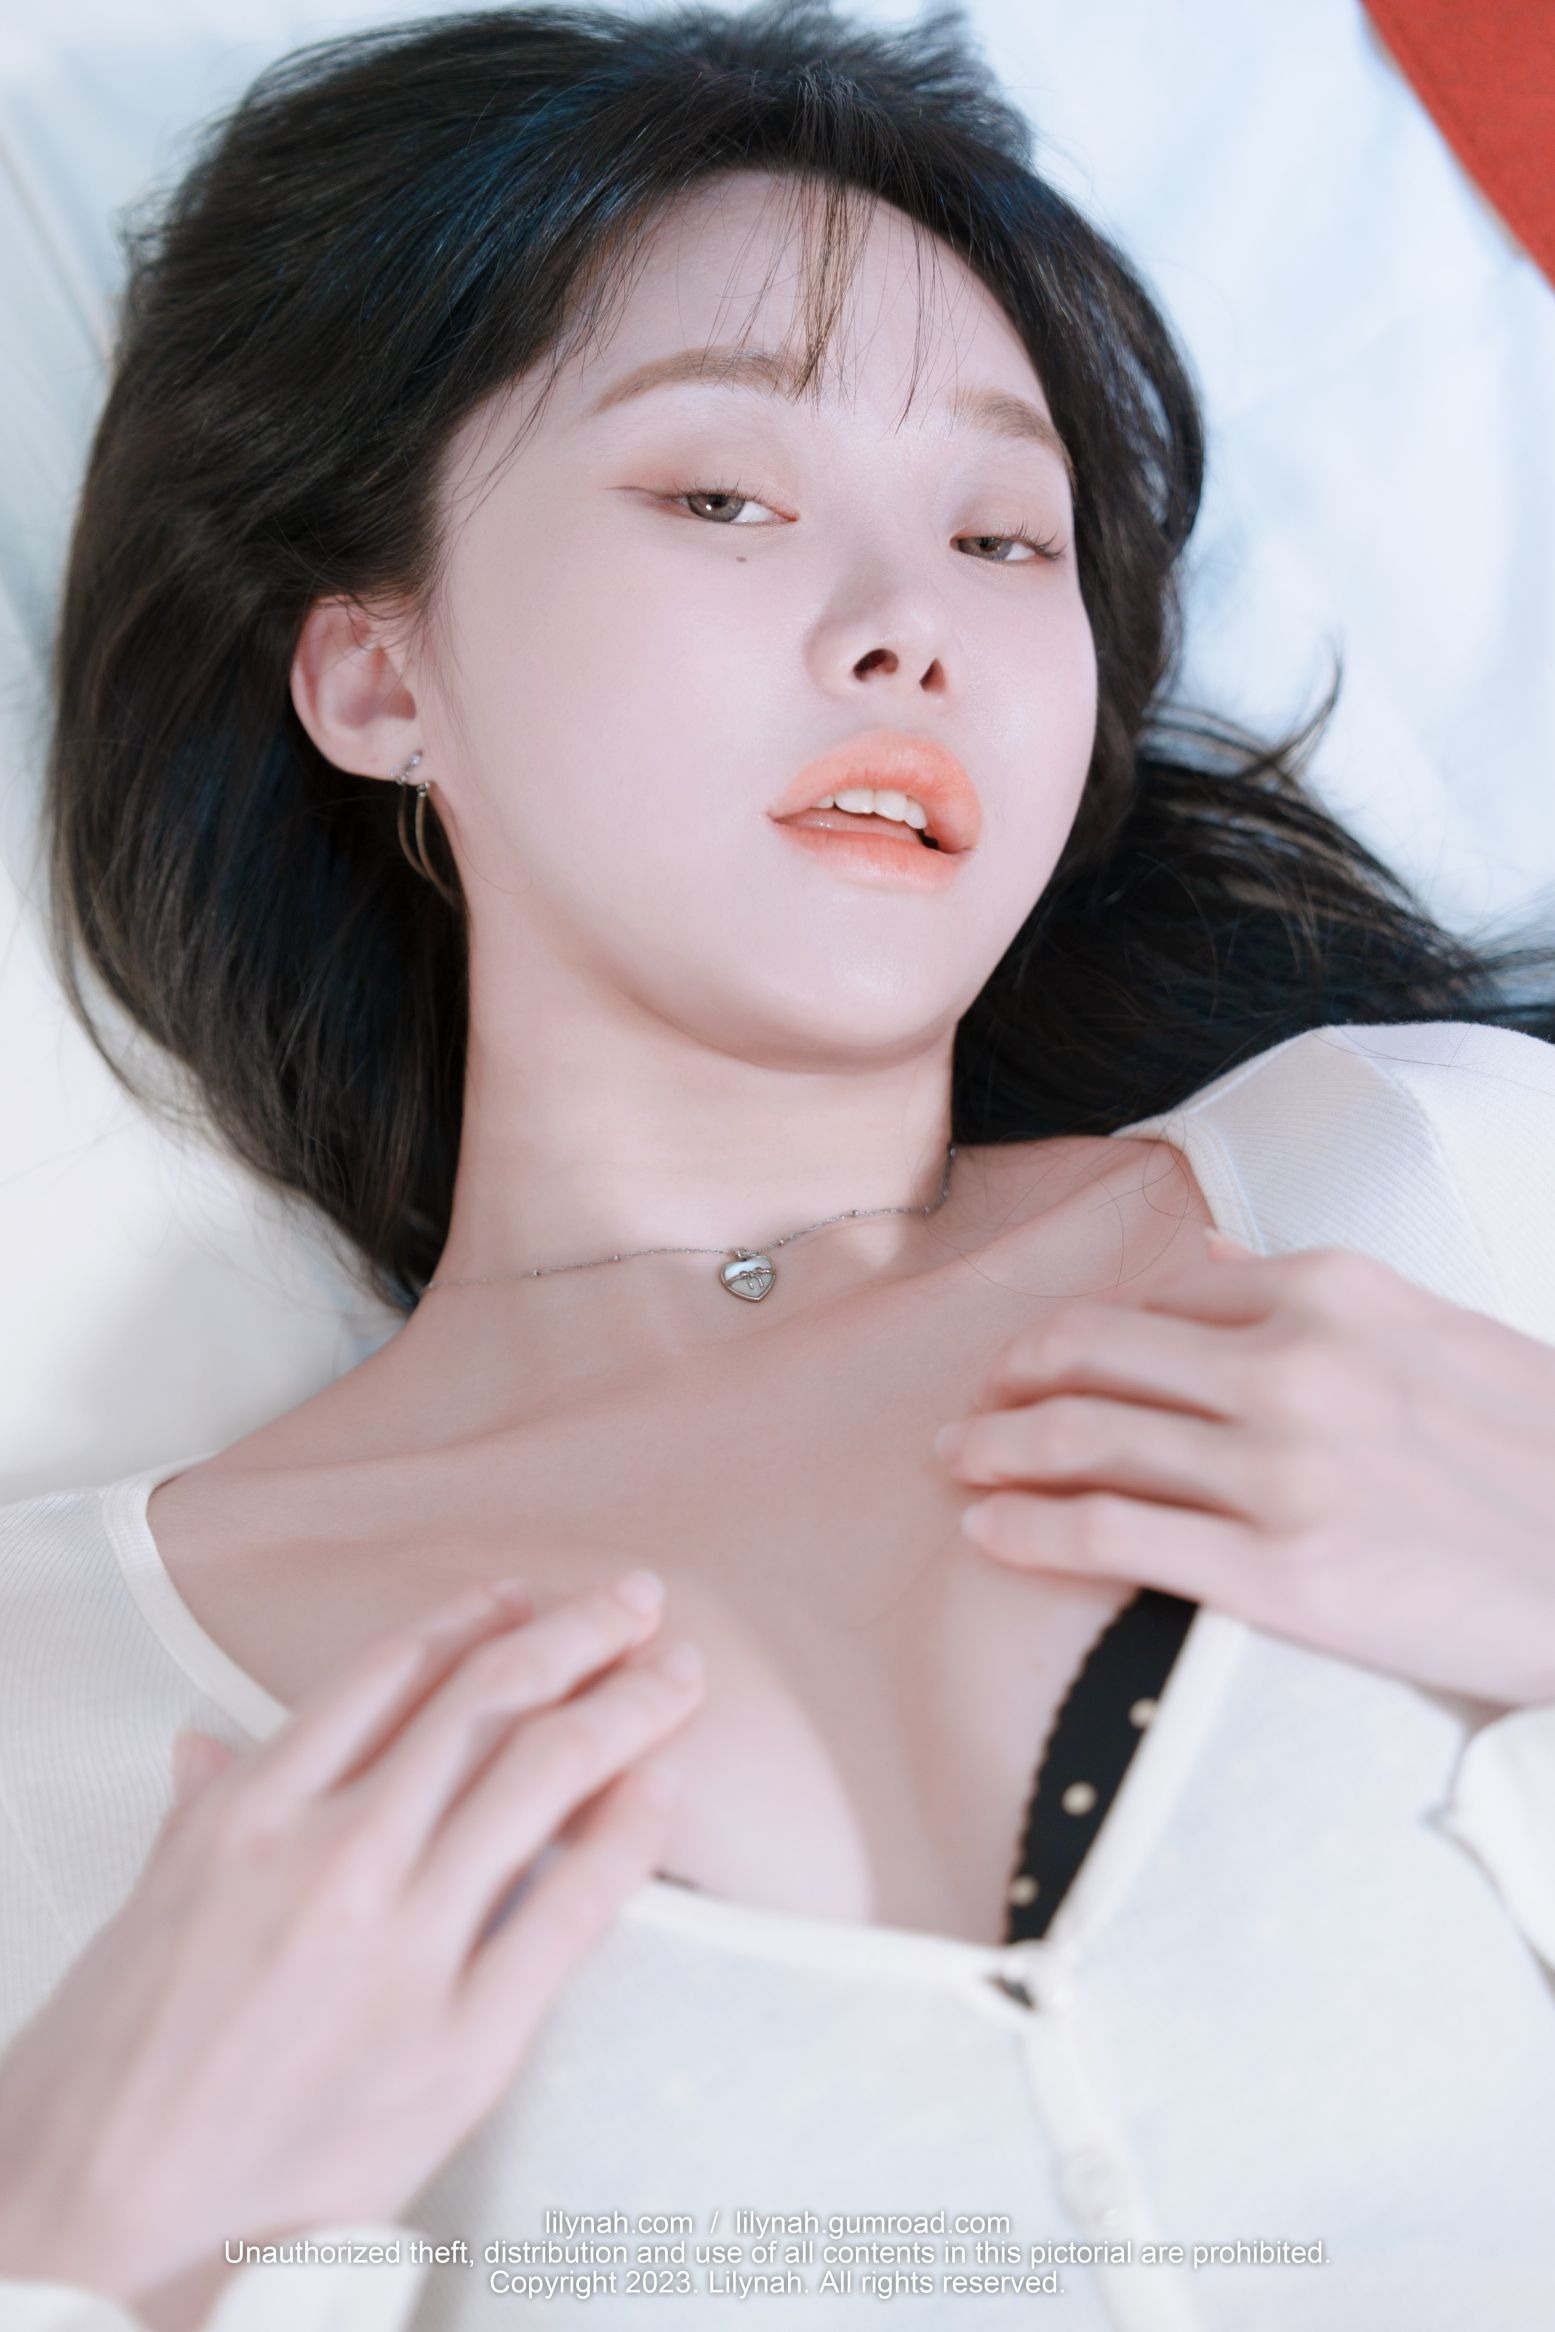 [Lilynah] Inah (이나) Lw081 Vol.34 - My First S(59)